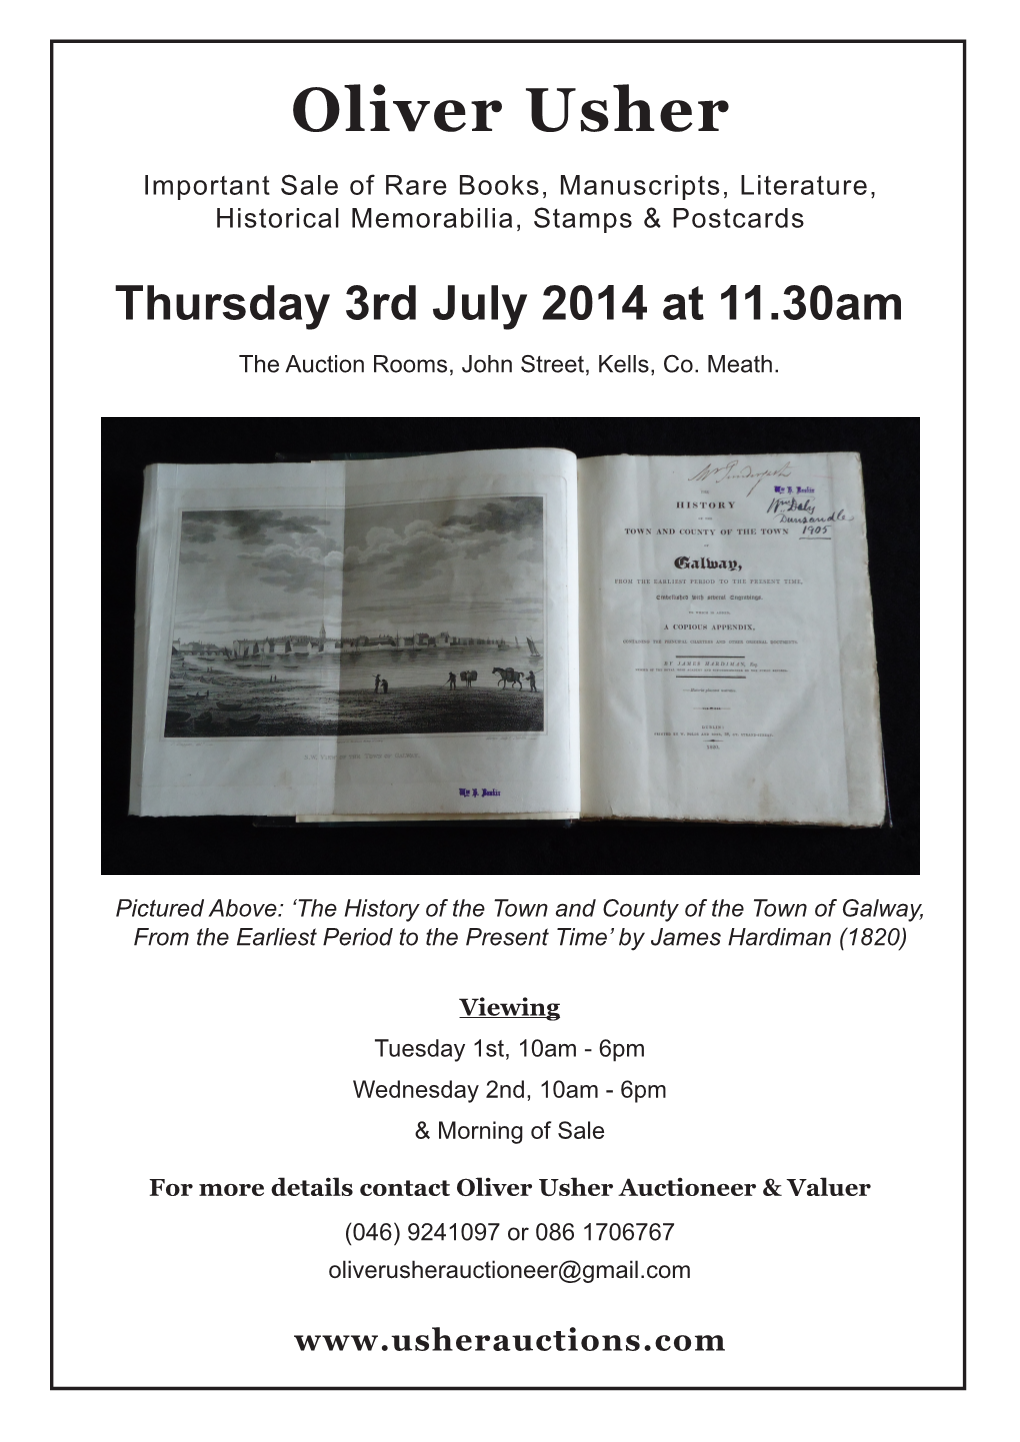 Thursday 3Rd July 2014 at 11.30Am the Auction Rooms, John Street, Kells, Co